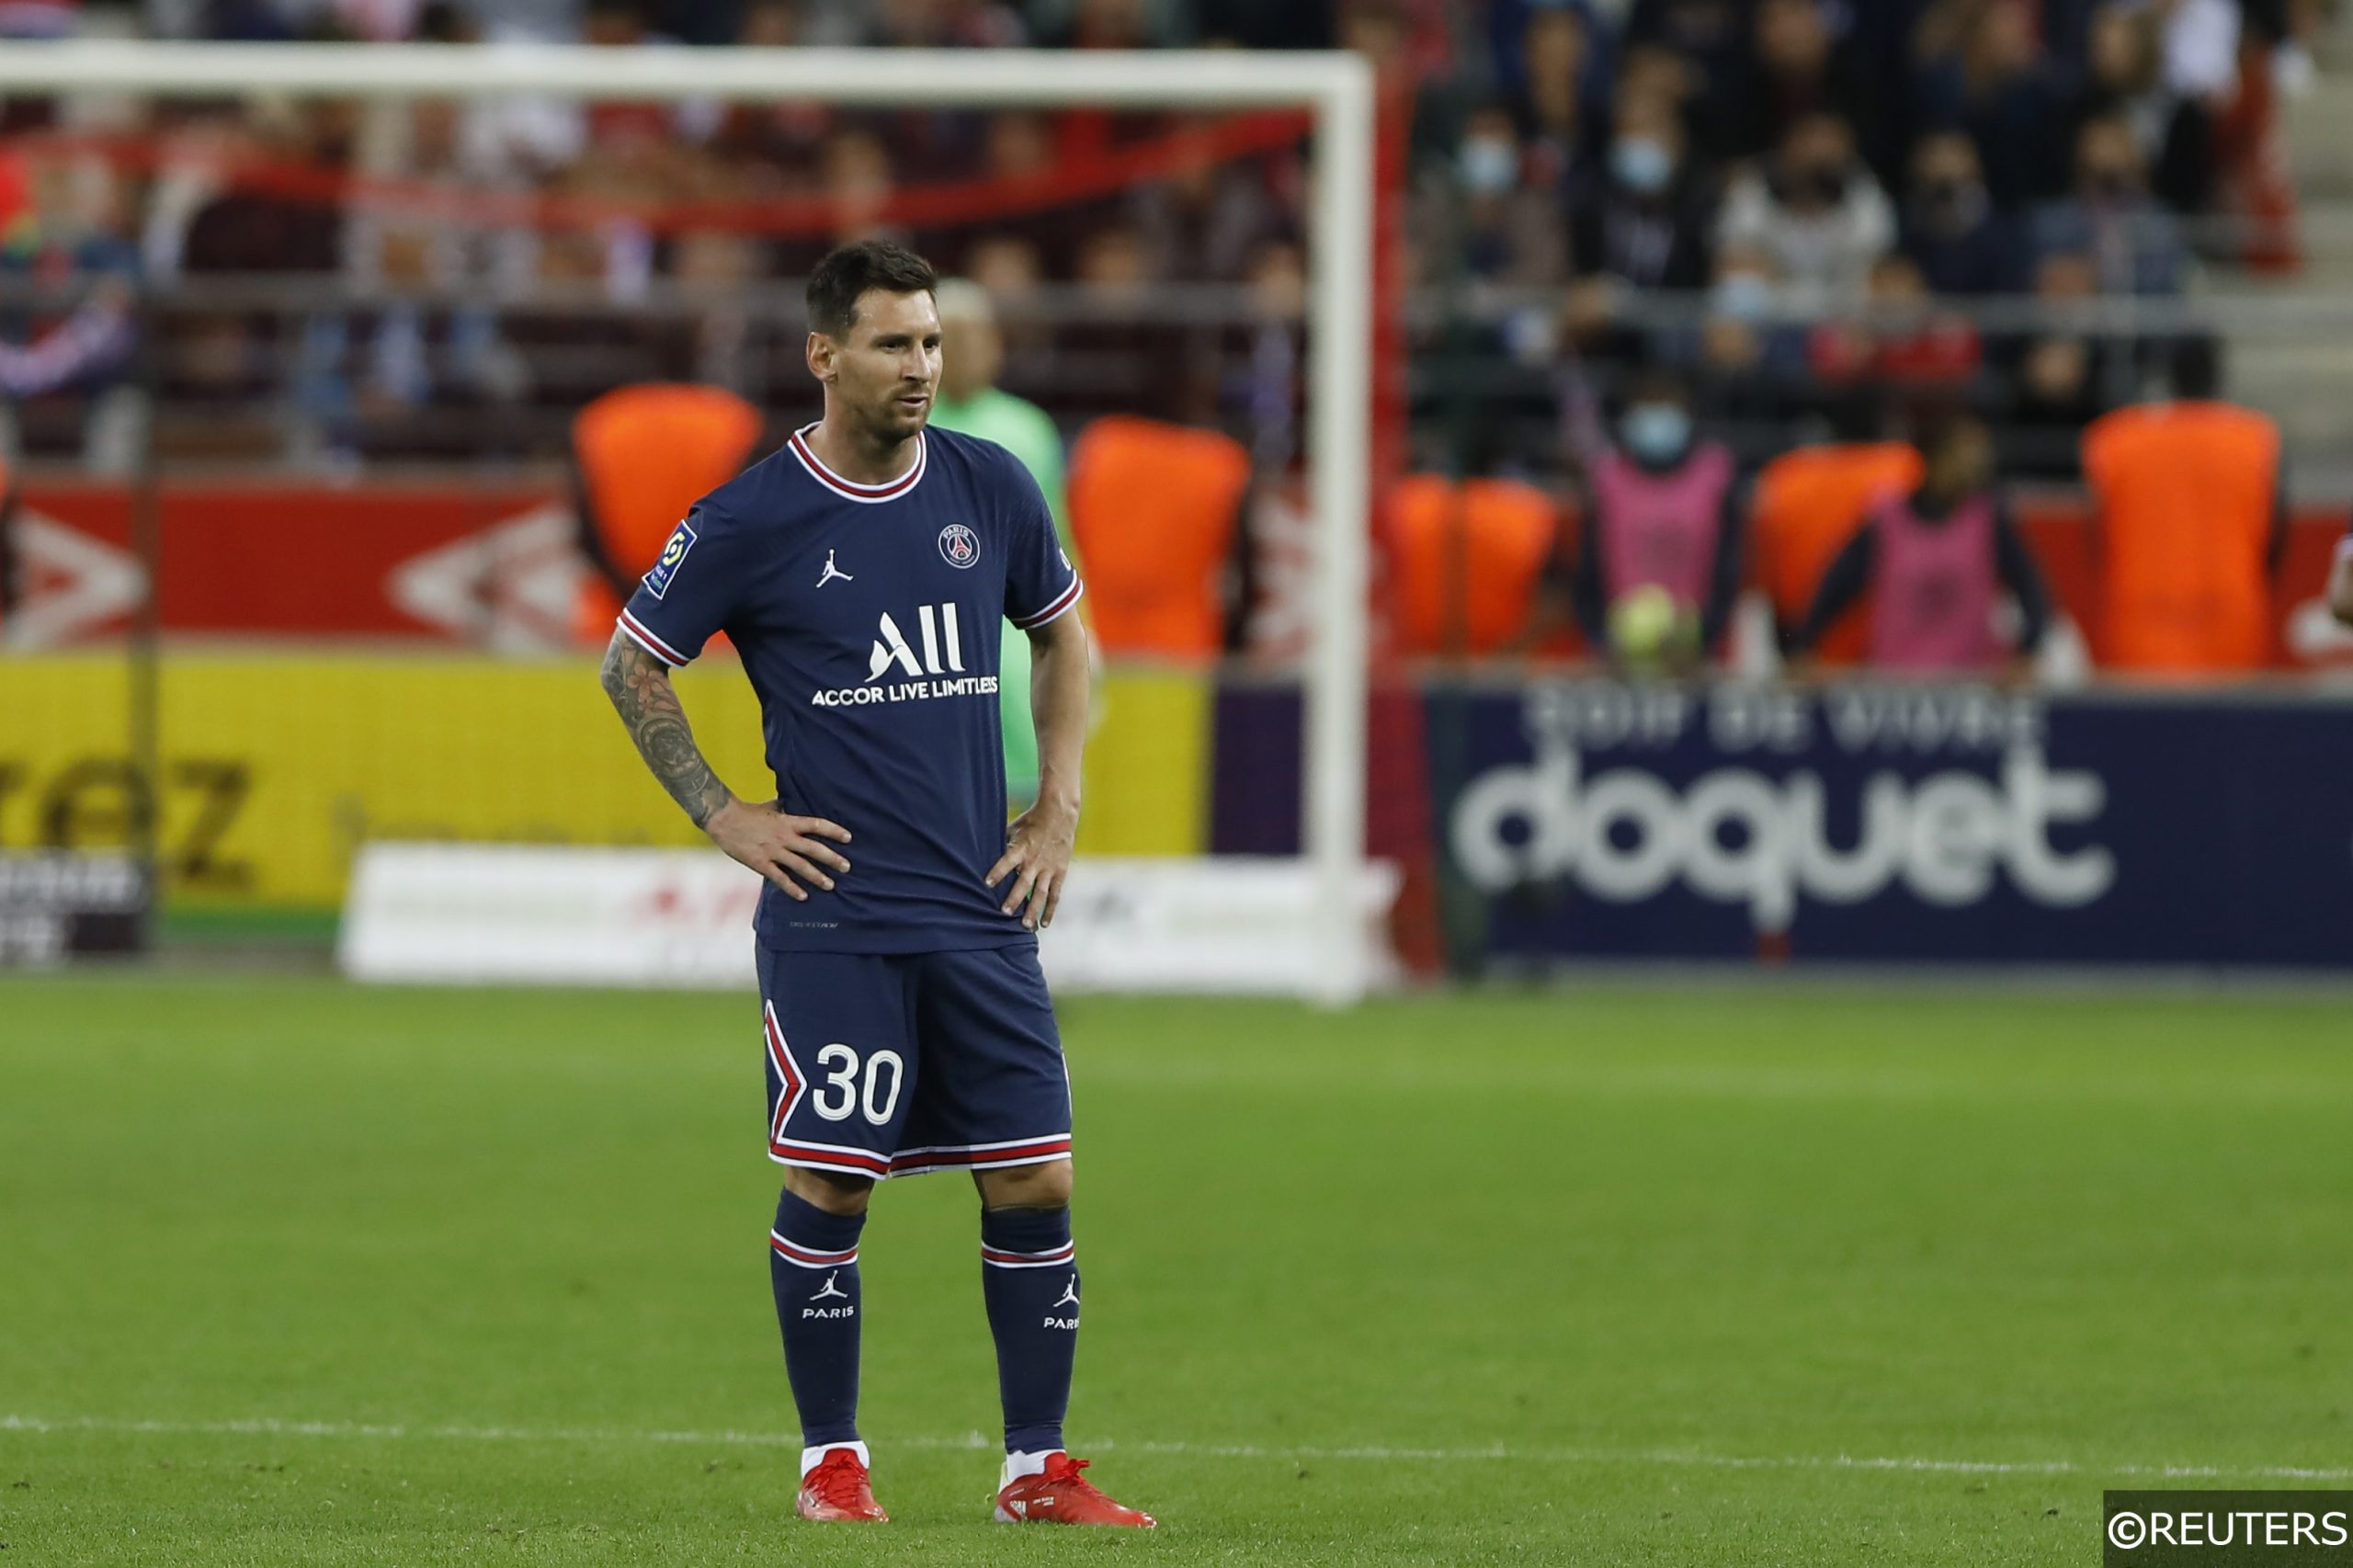 COMPLIANT - Lionel Messi making his debut for PSG